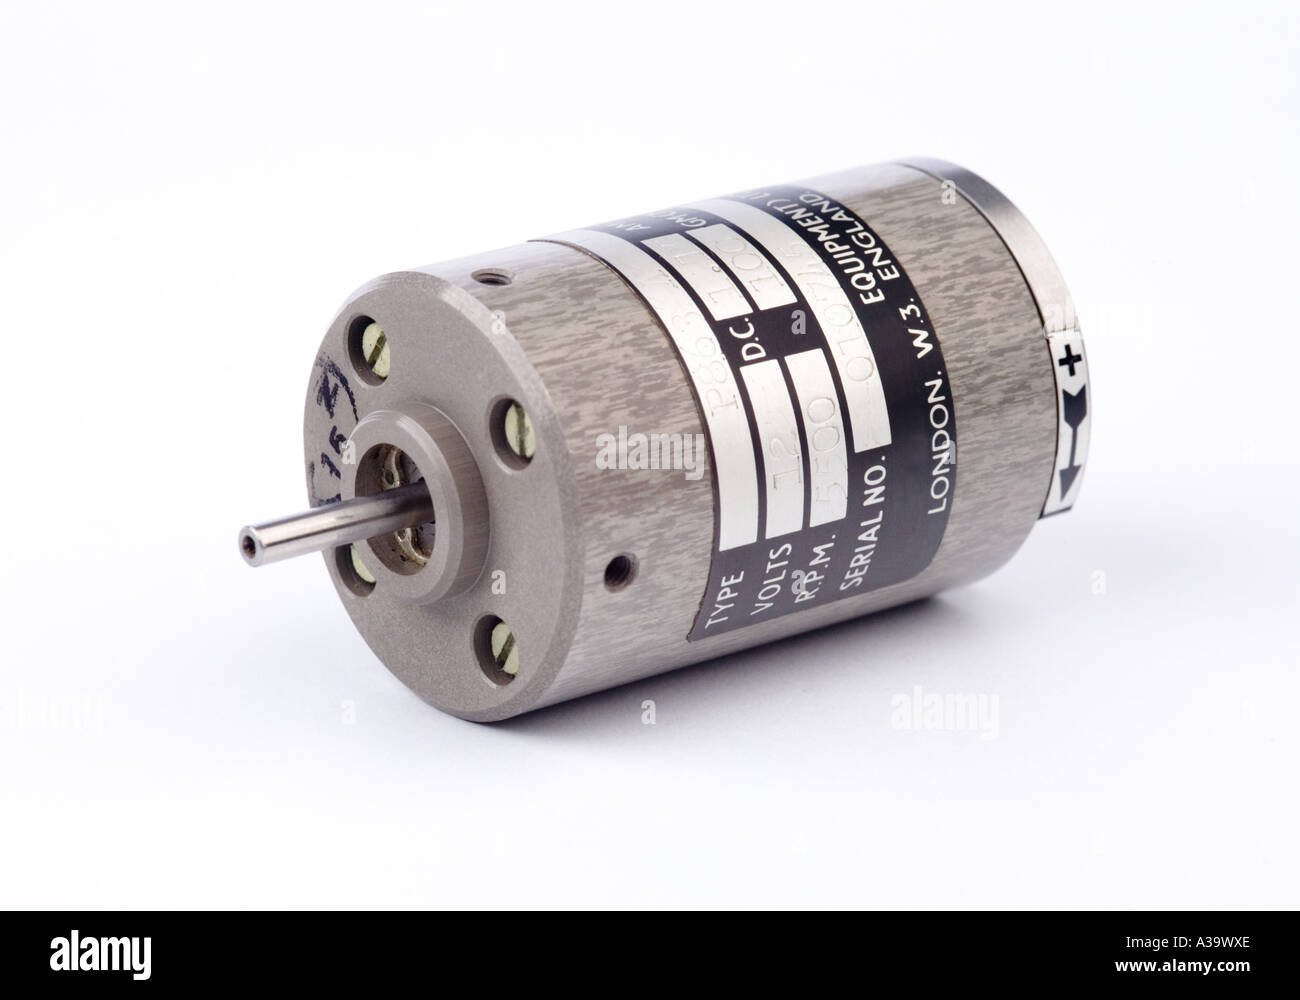 small 12 volt electric motor Stock Photo